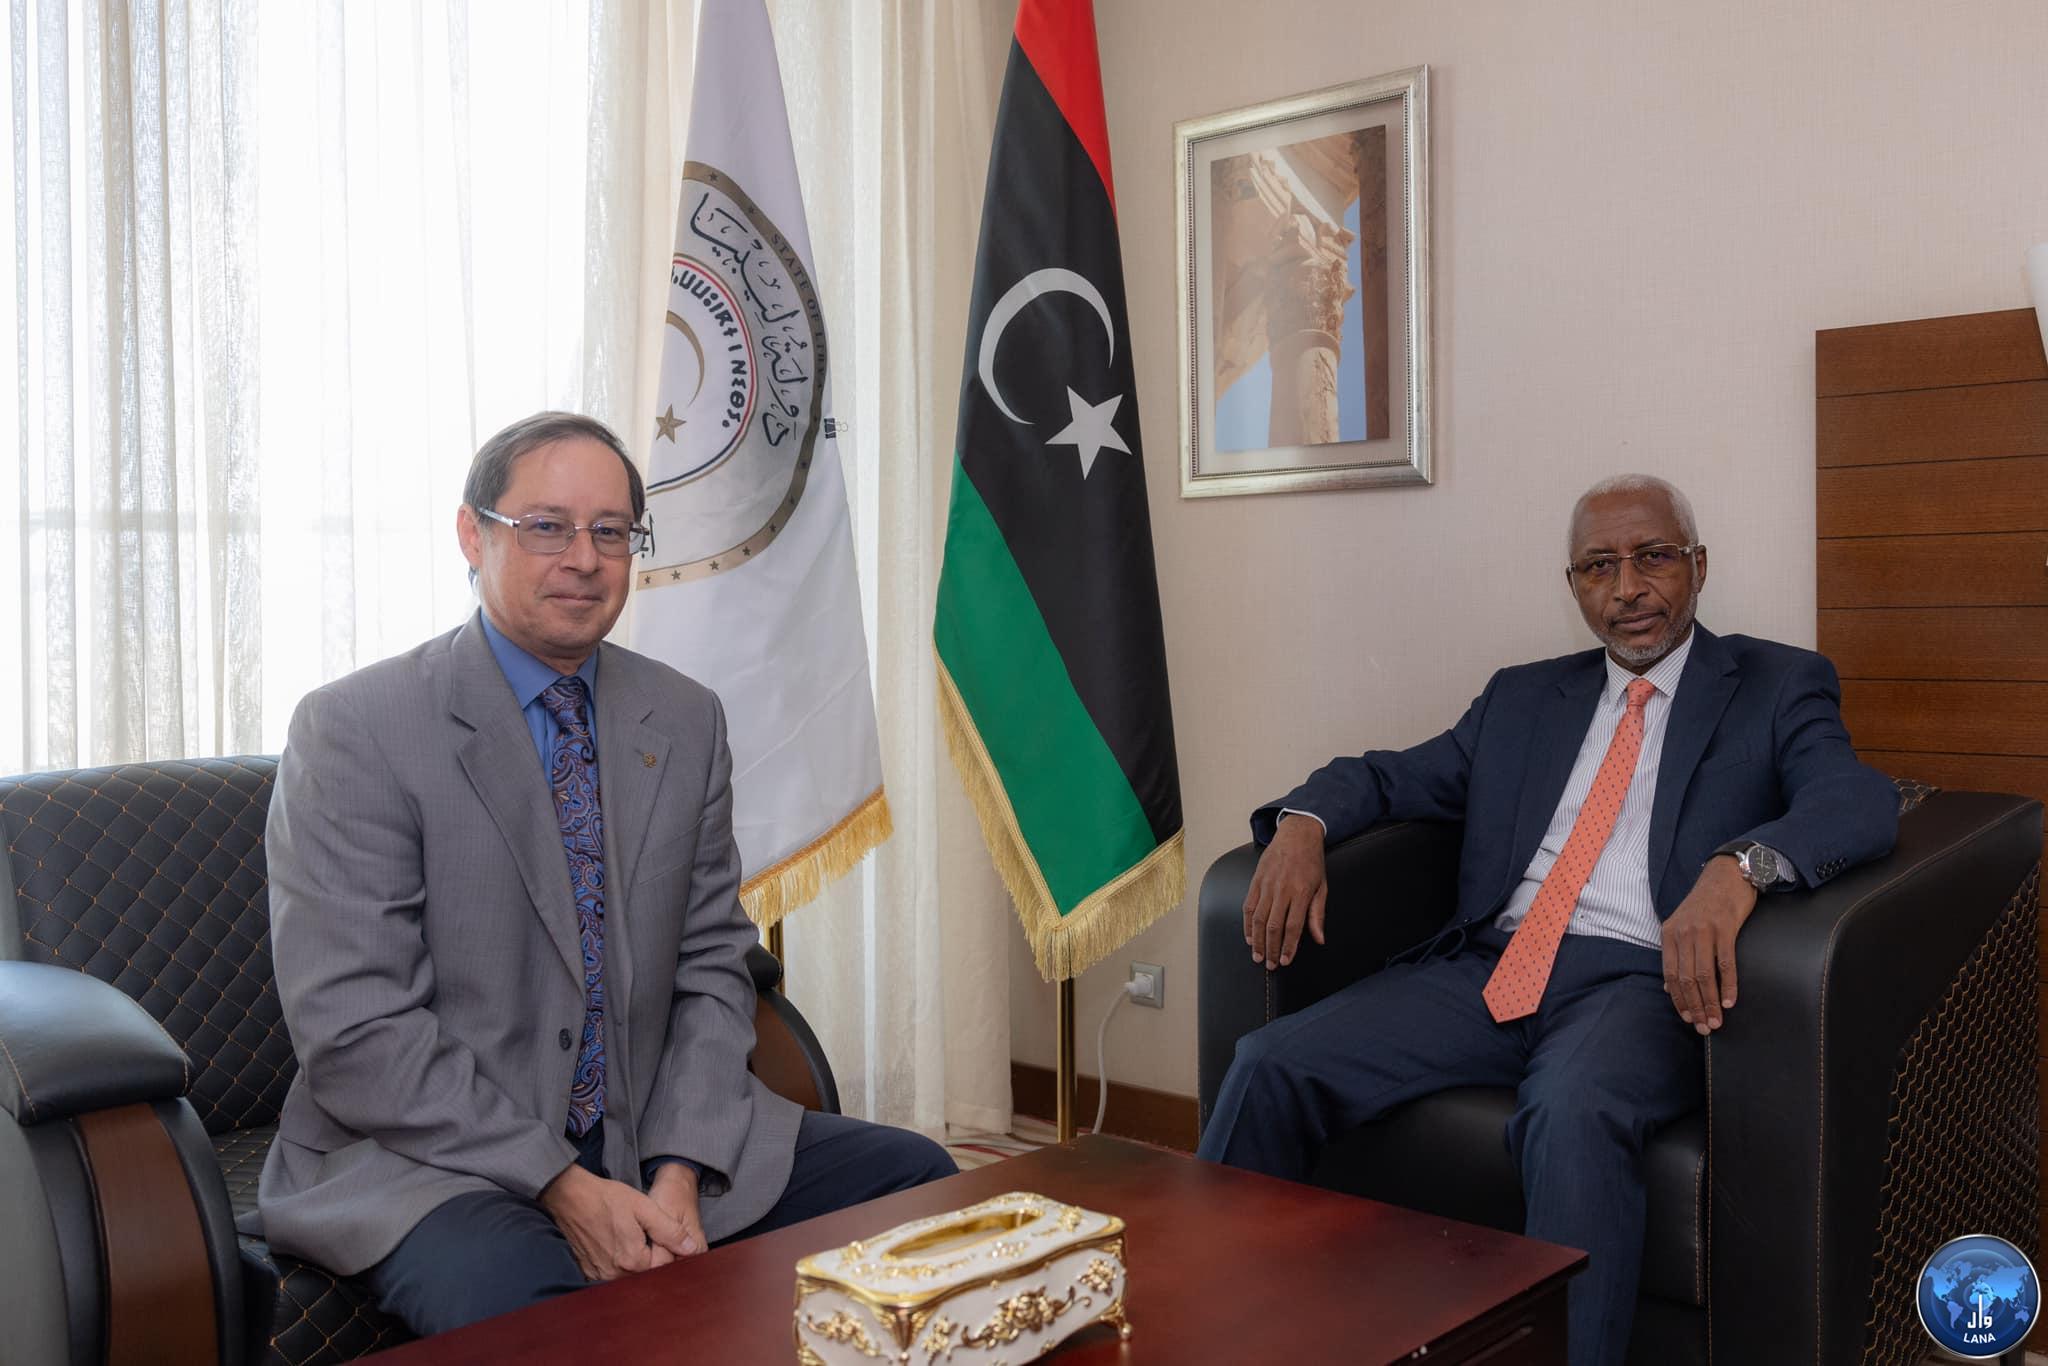 The First Deputy Prime Minister of the State Council meets with the Russian Ambassador to Libya.